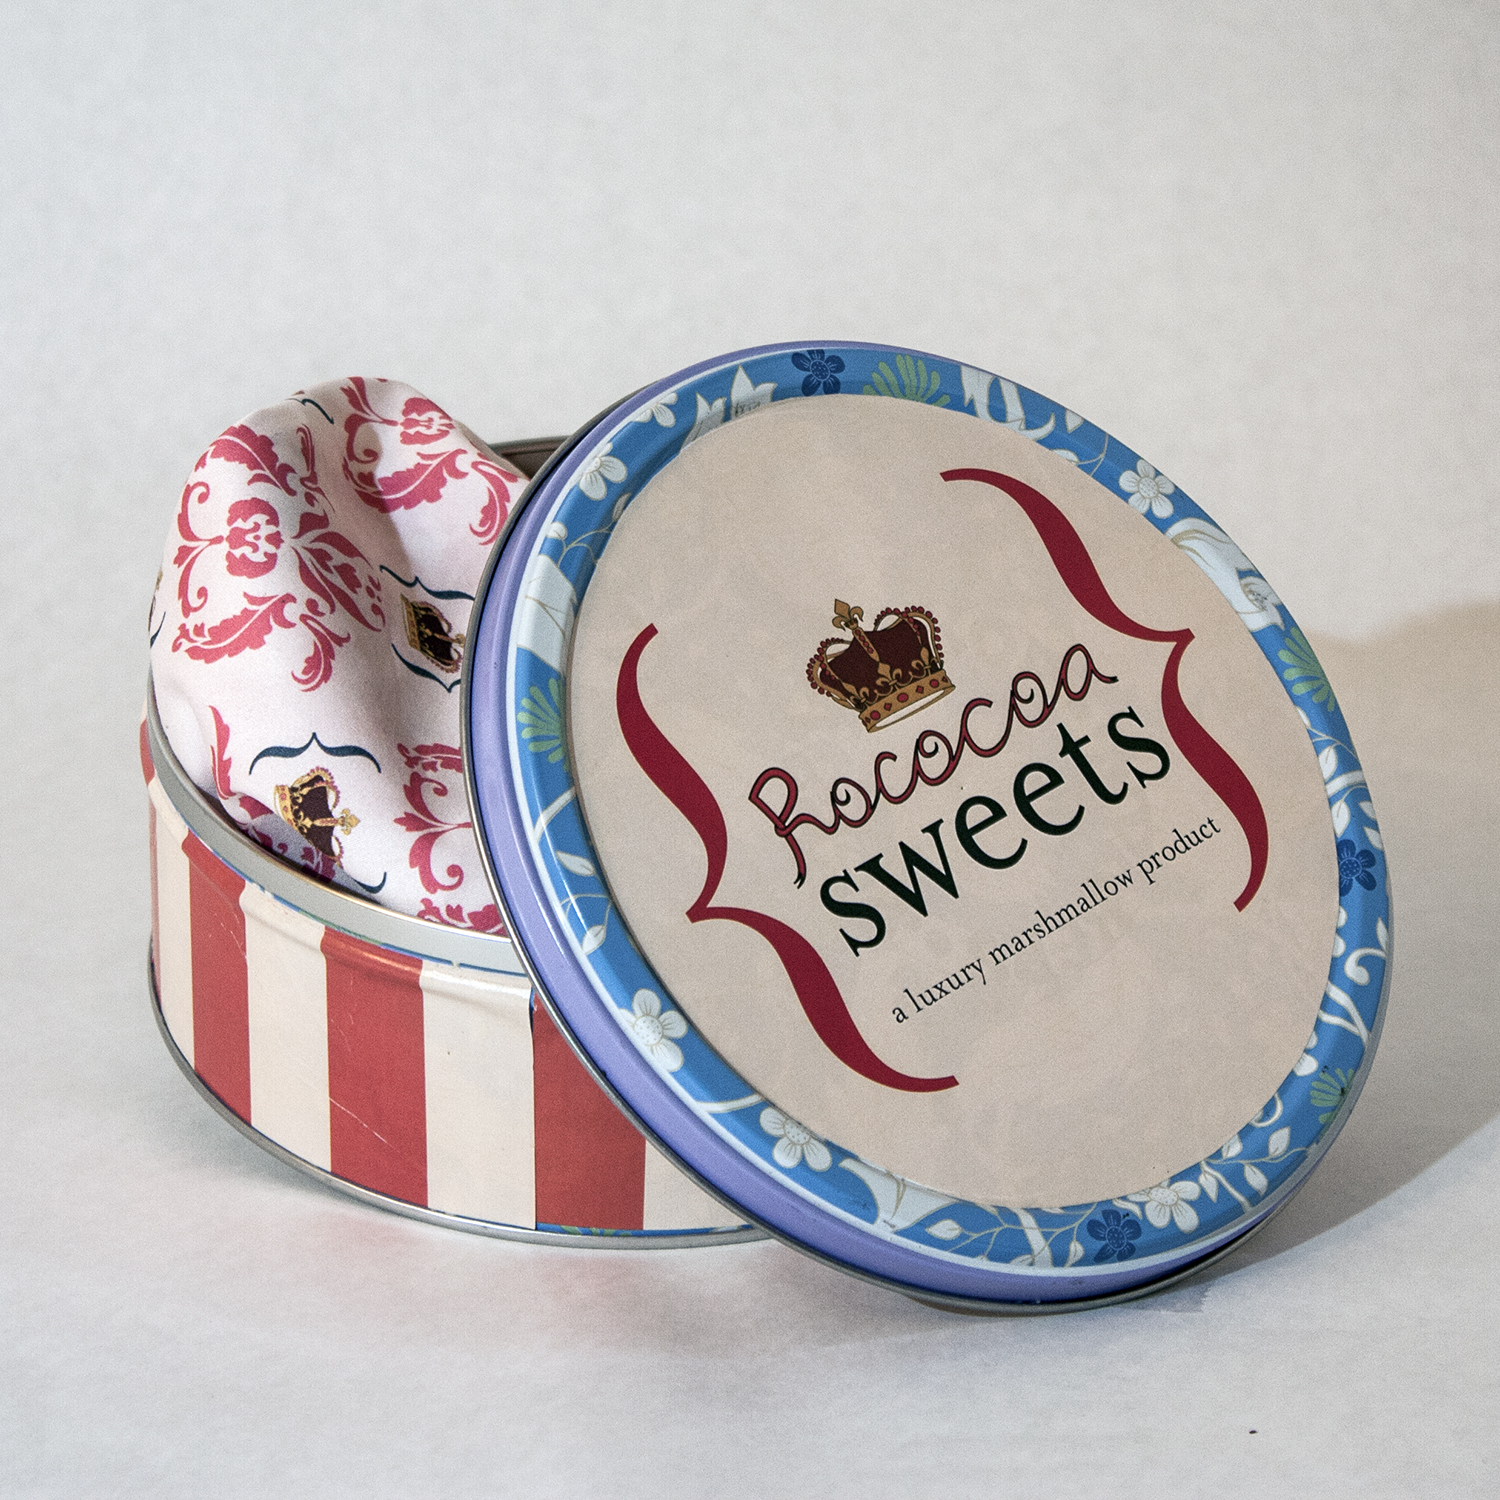 Rococoa Sweets package design